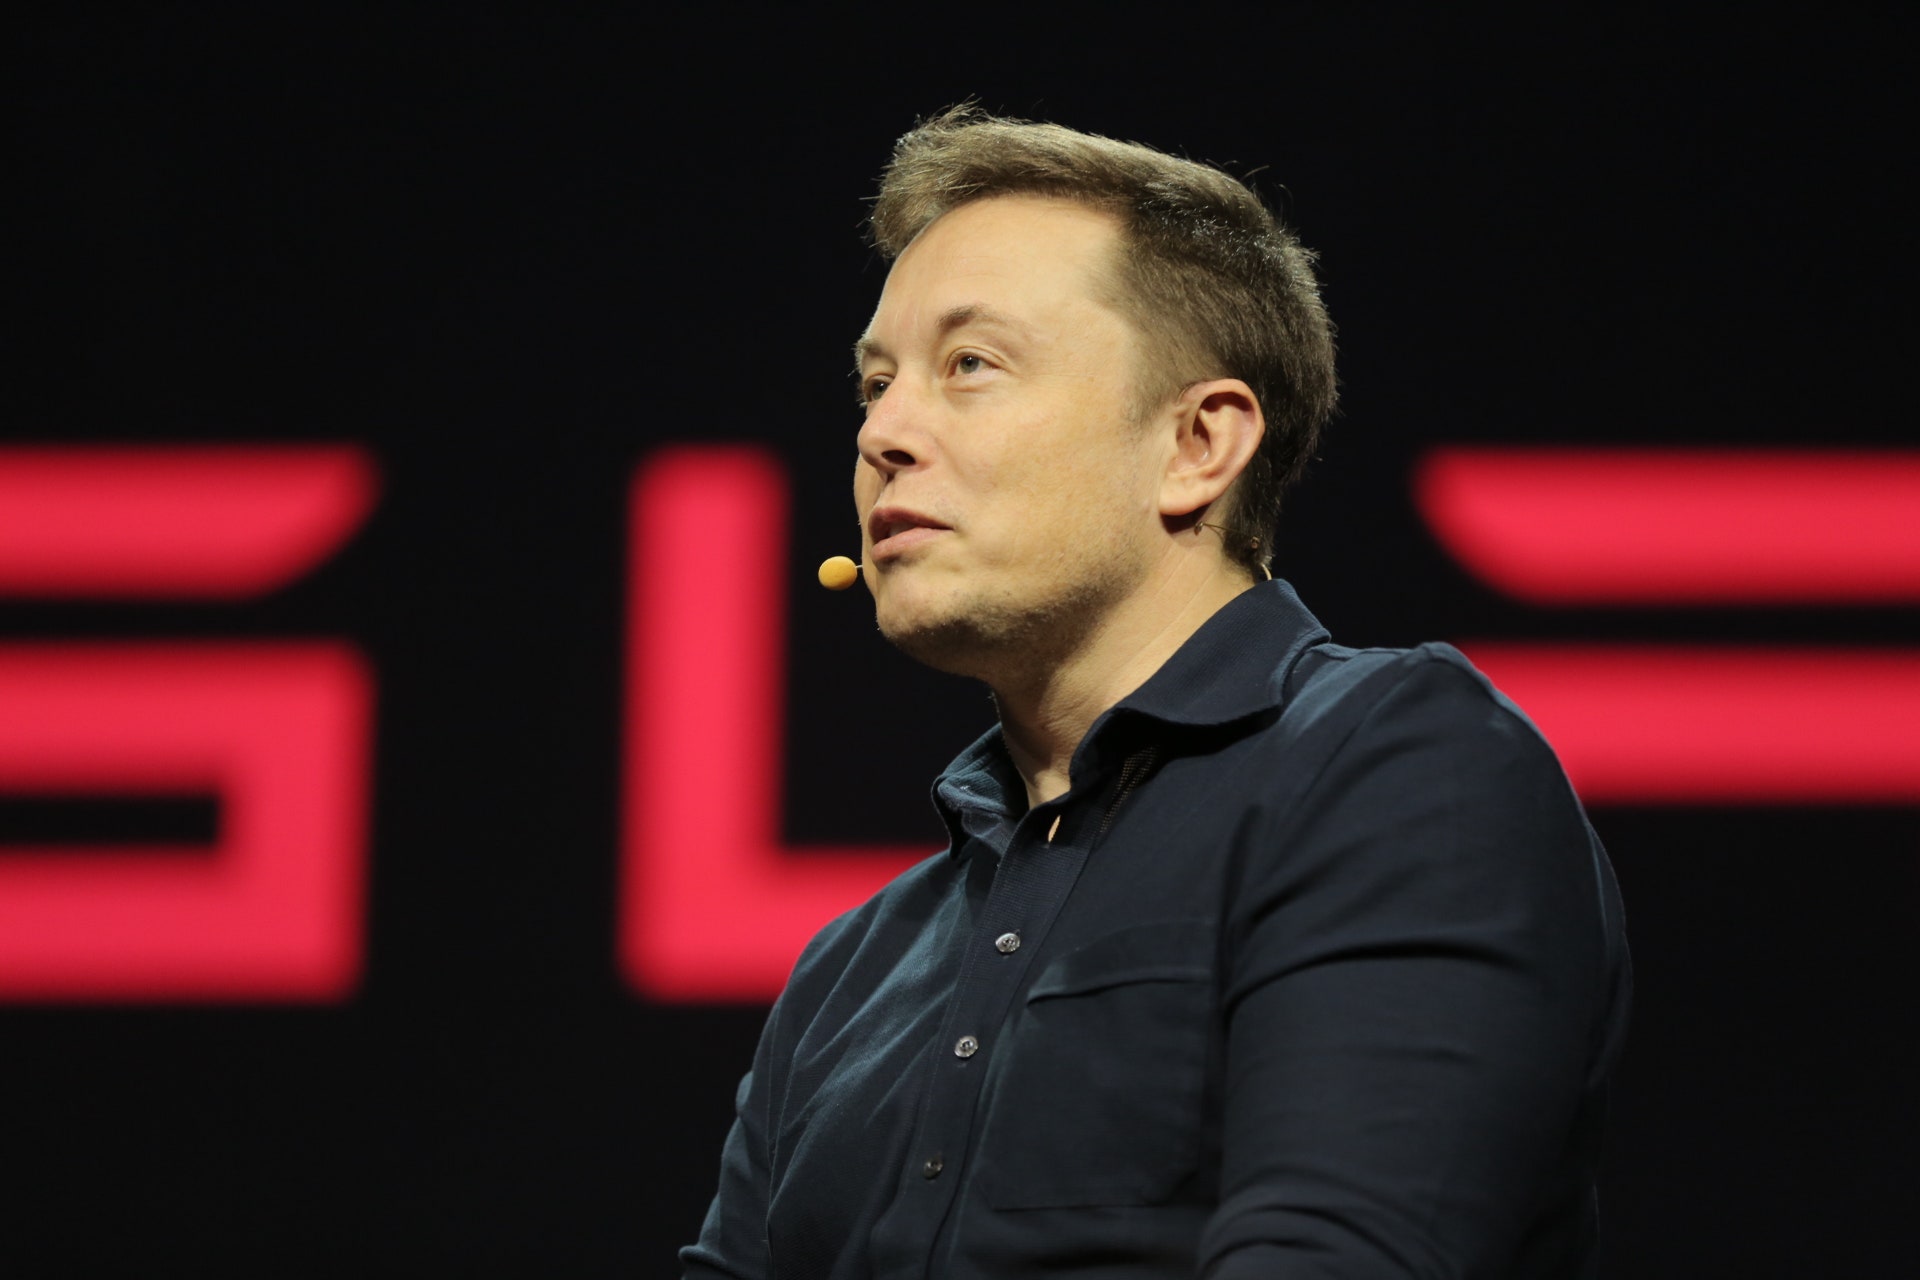 Elon Musk Warns China On 'Population Collapse:' Each Generation Will Lose 40% Of People